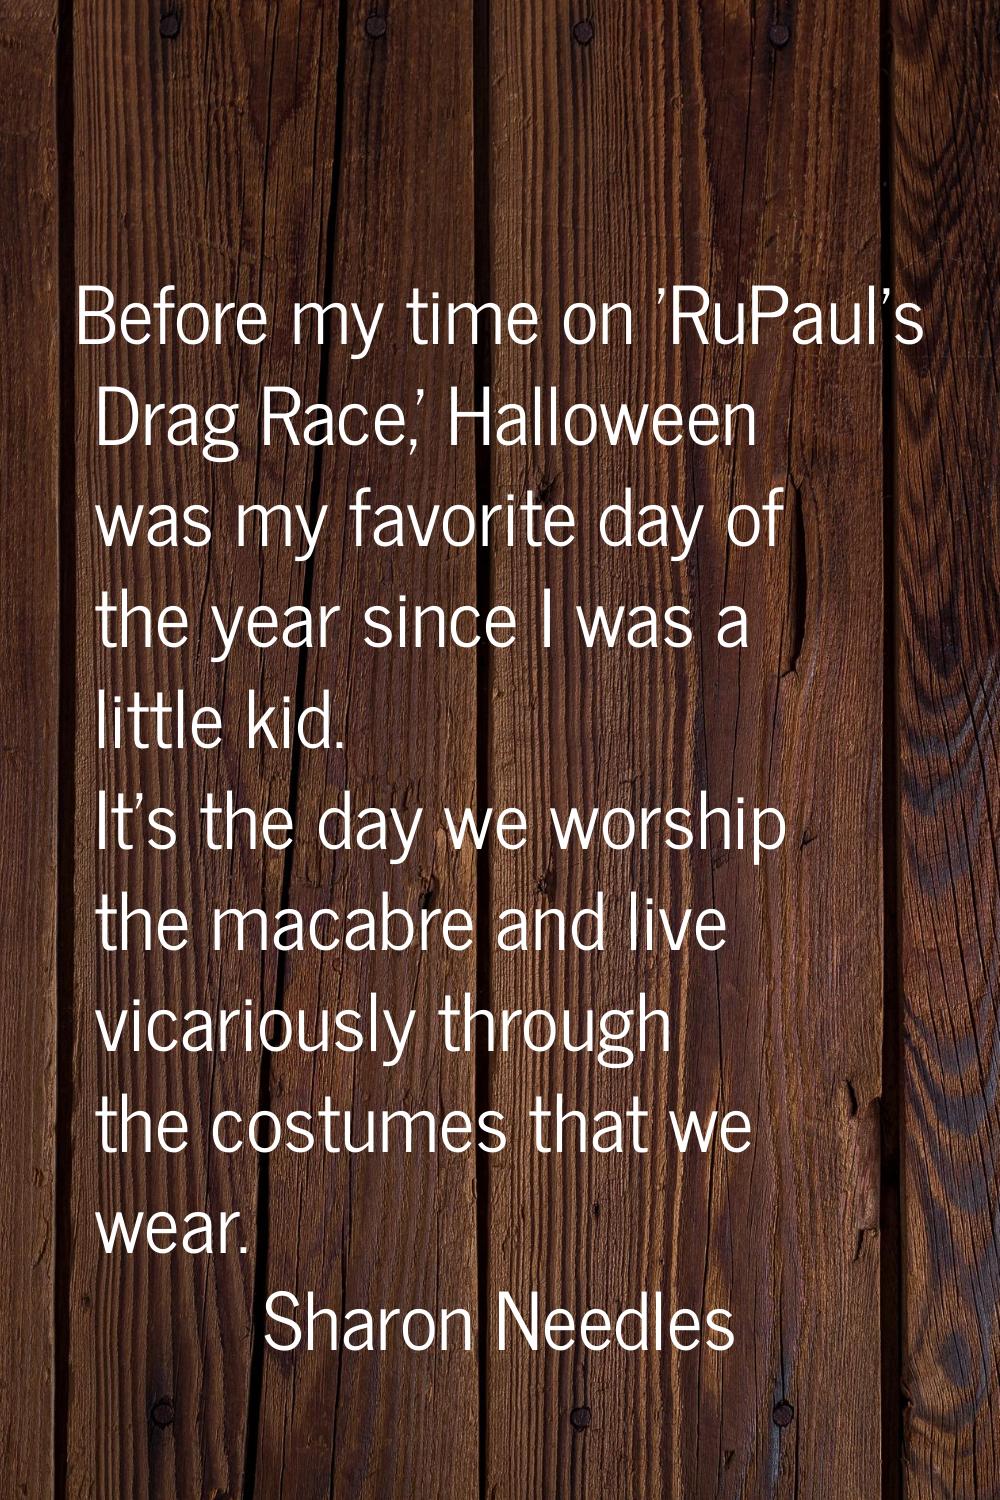 Before my time on 'RuPaul's Drag Race,' Halloween was my favorite day of the year since I was a lit